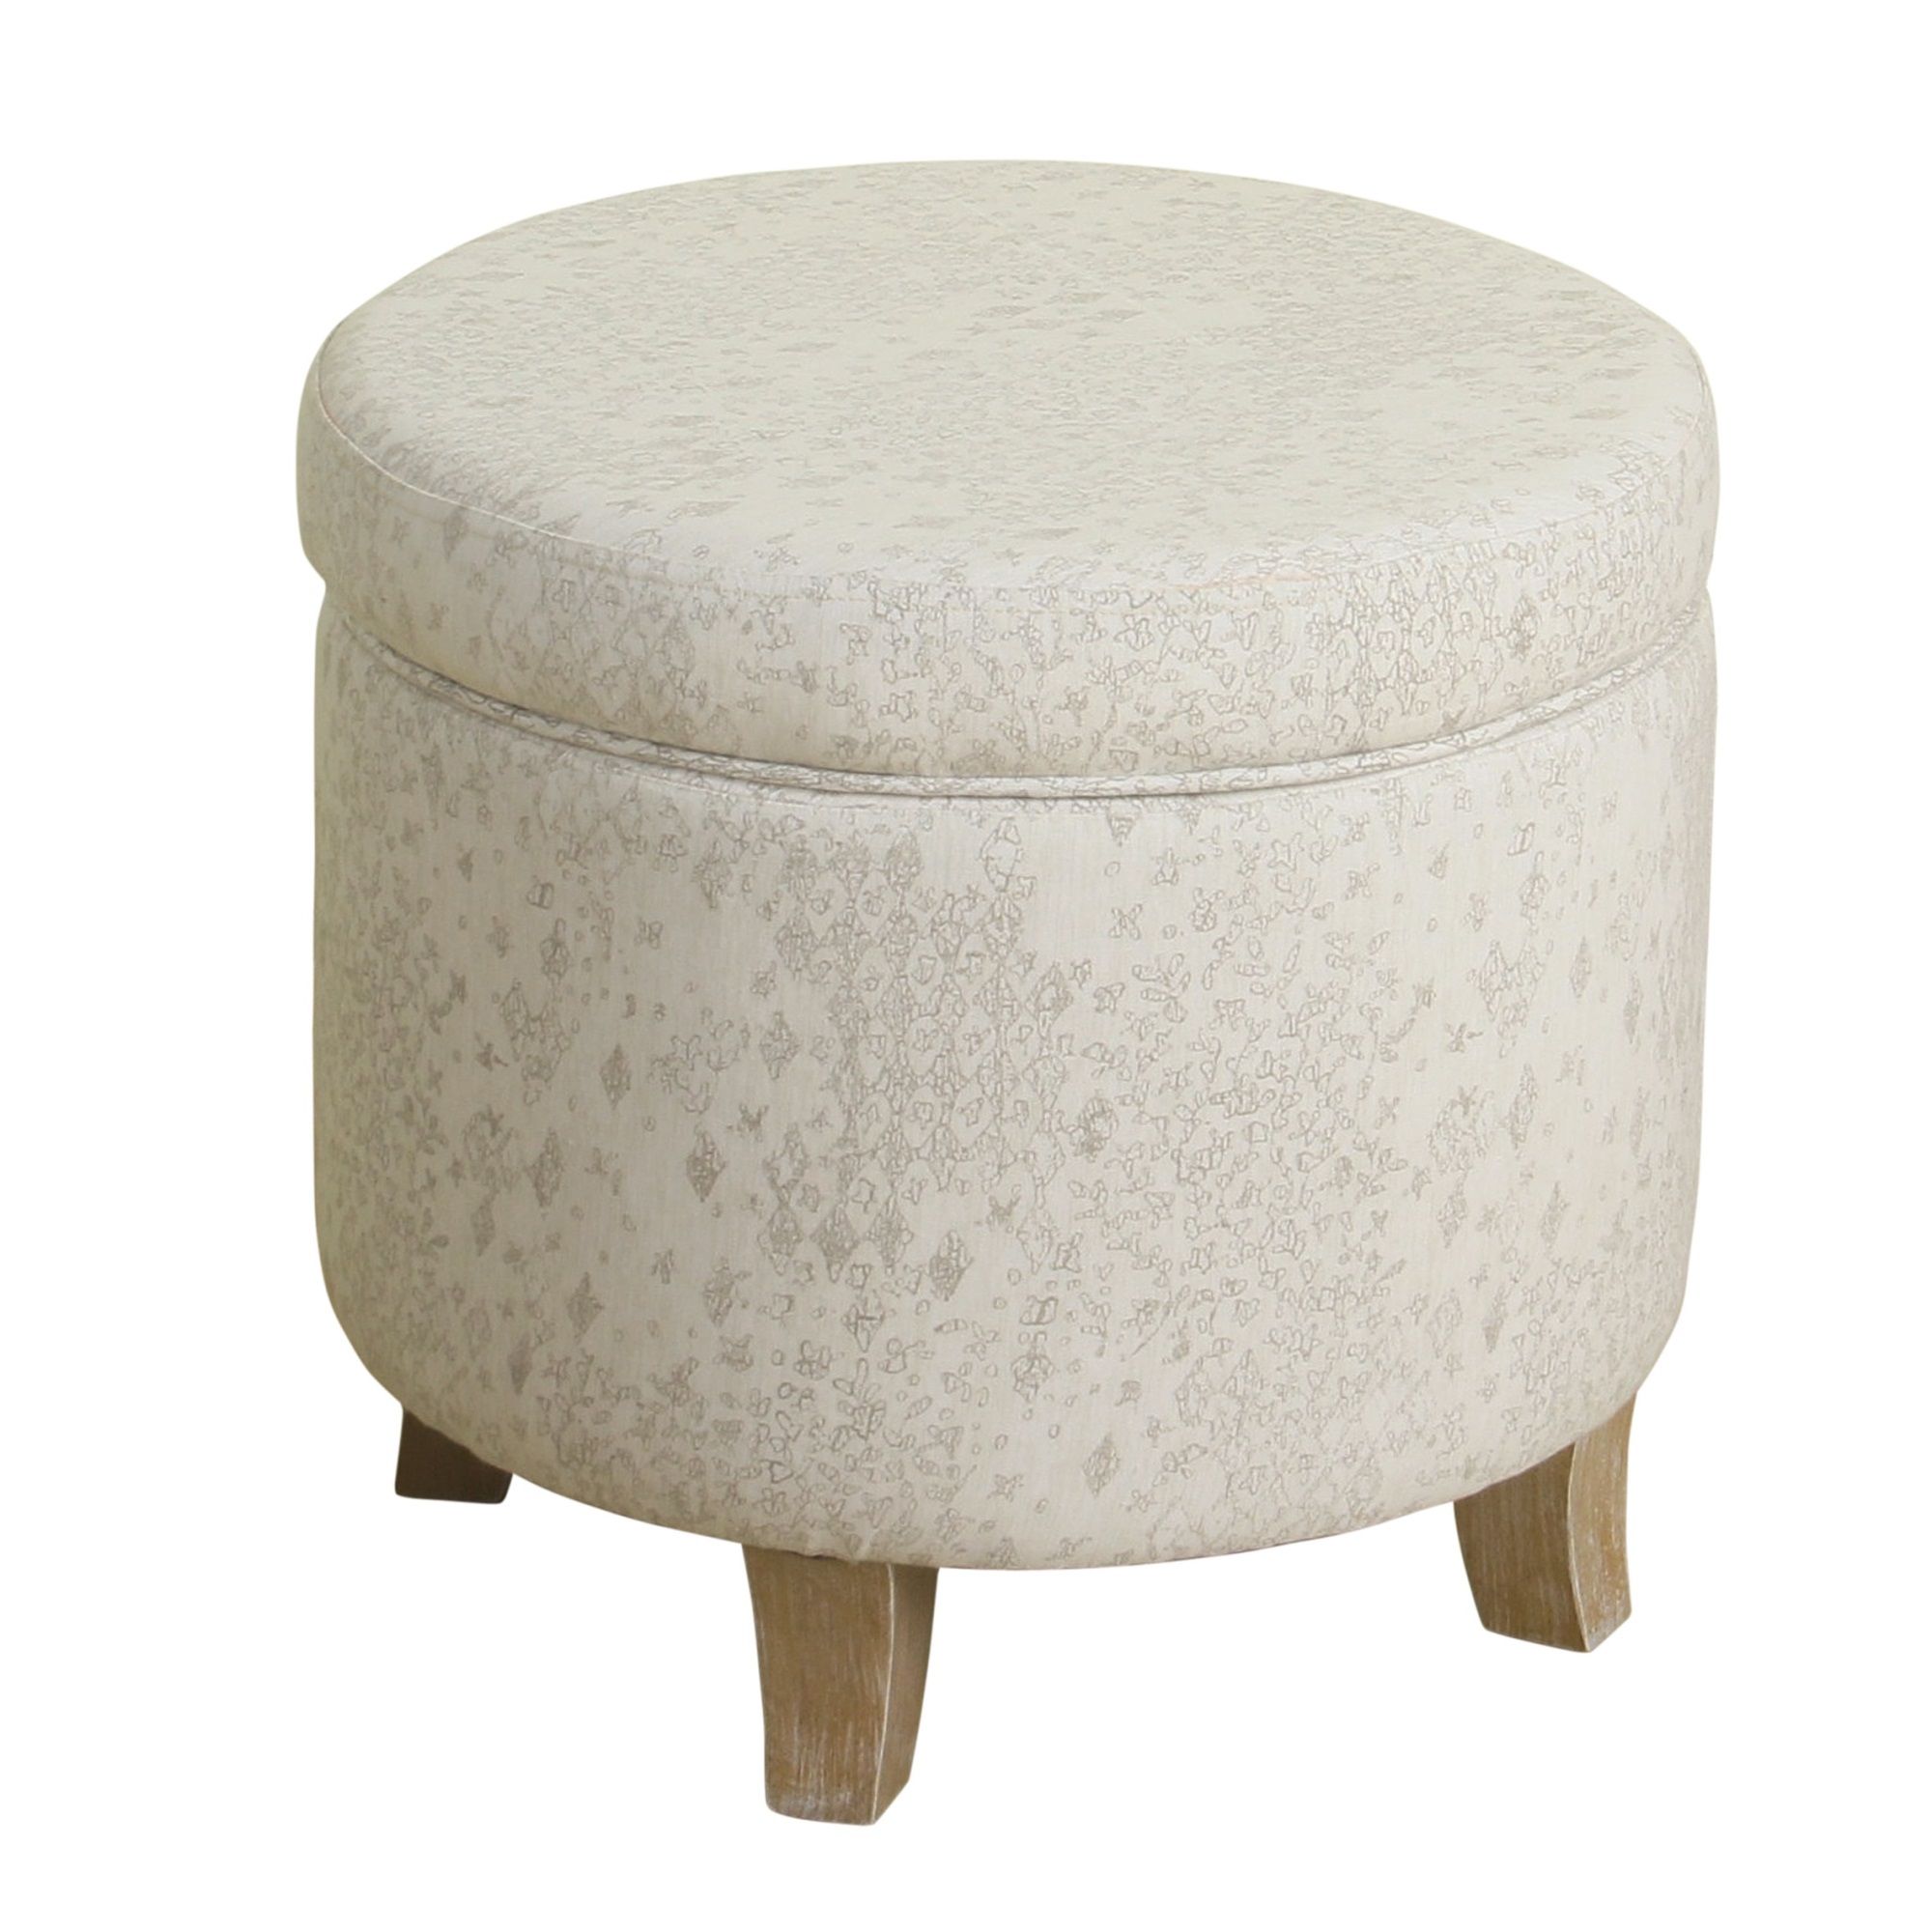 Fabric Upholstered Round Wooden Ottoman With Lift Off Lid Storage, Gray Inside Round Pouf Ottomans (View 11 of 20)